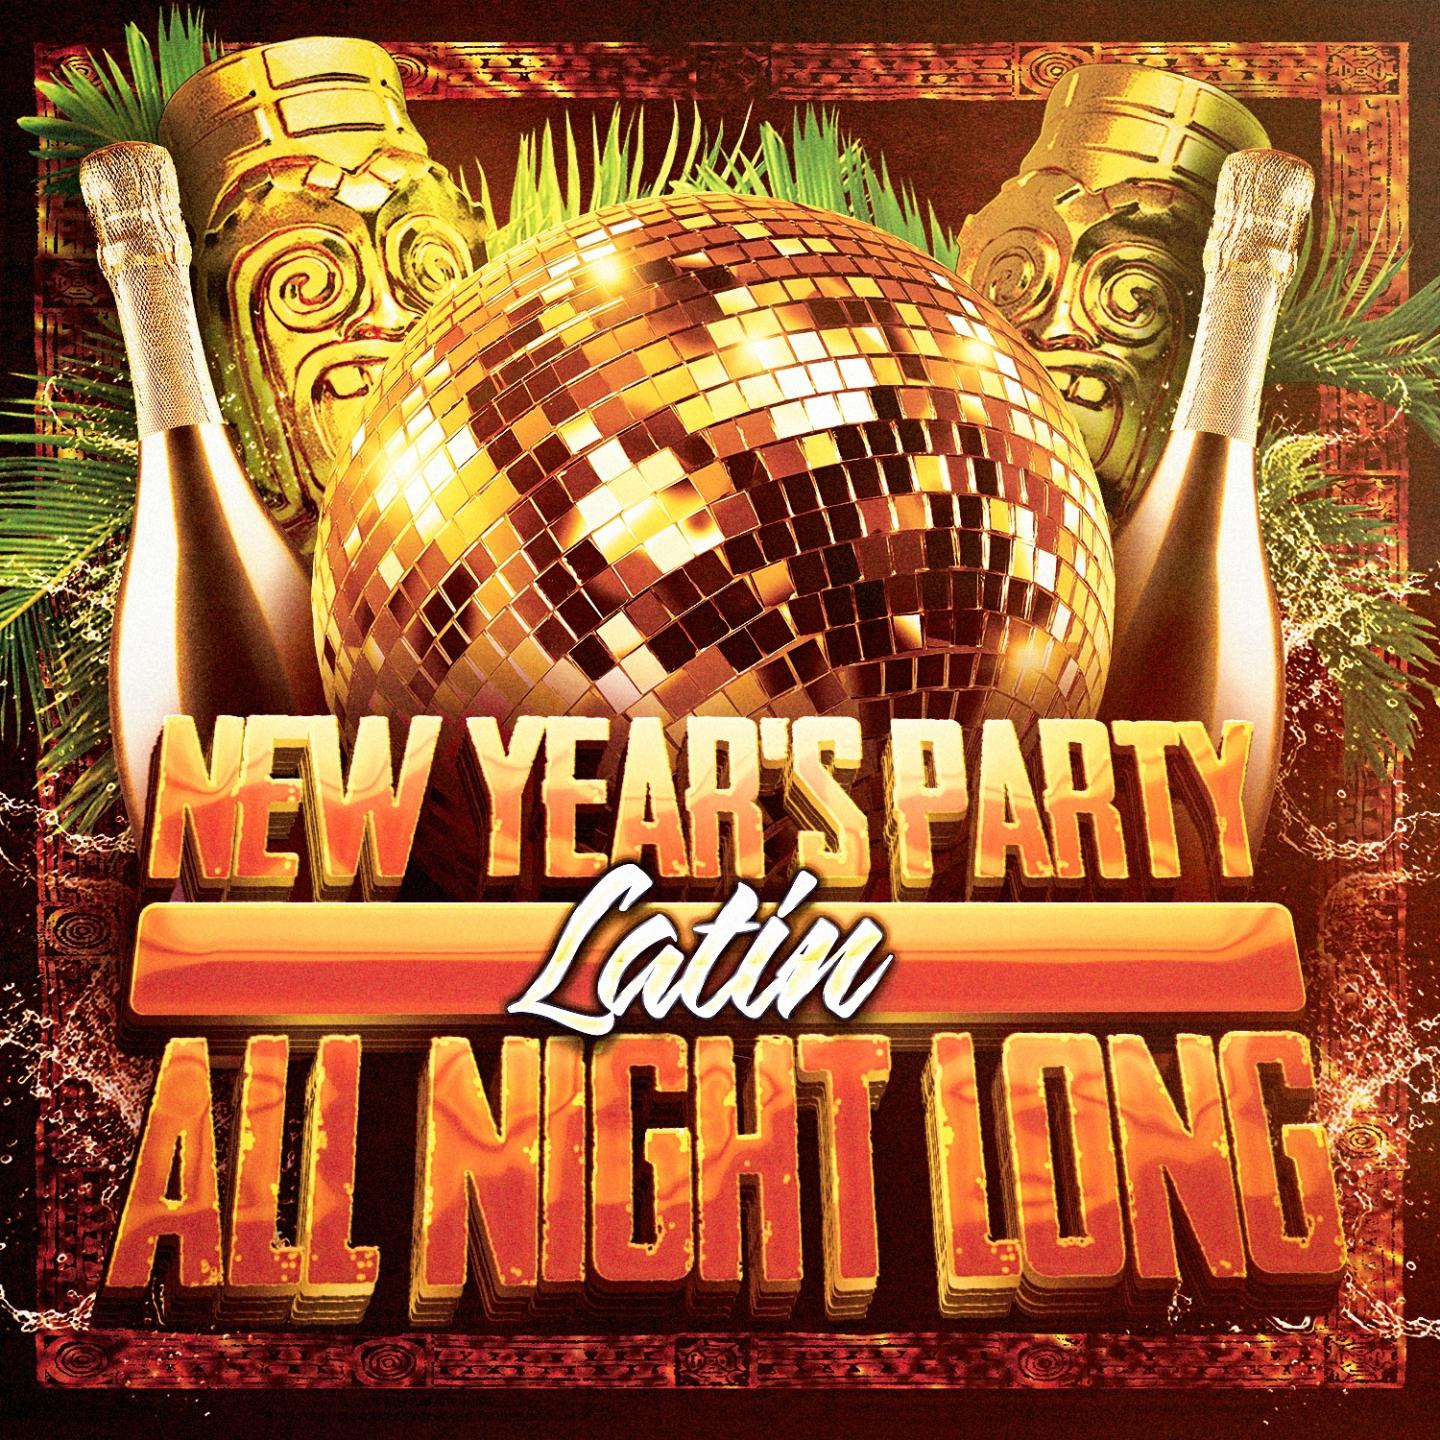 New Year's Party All Night Long (Latin)